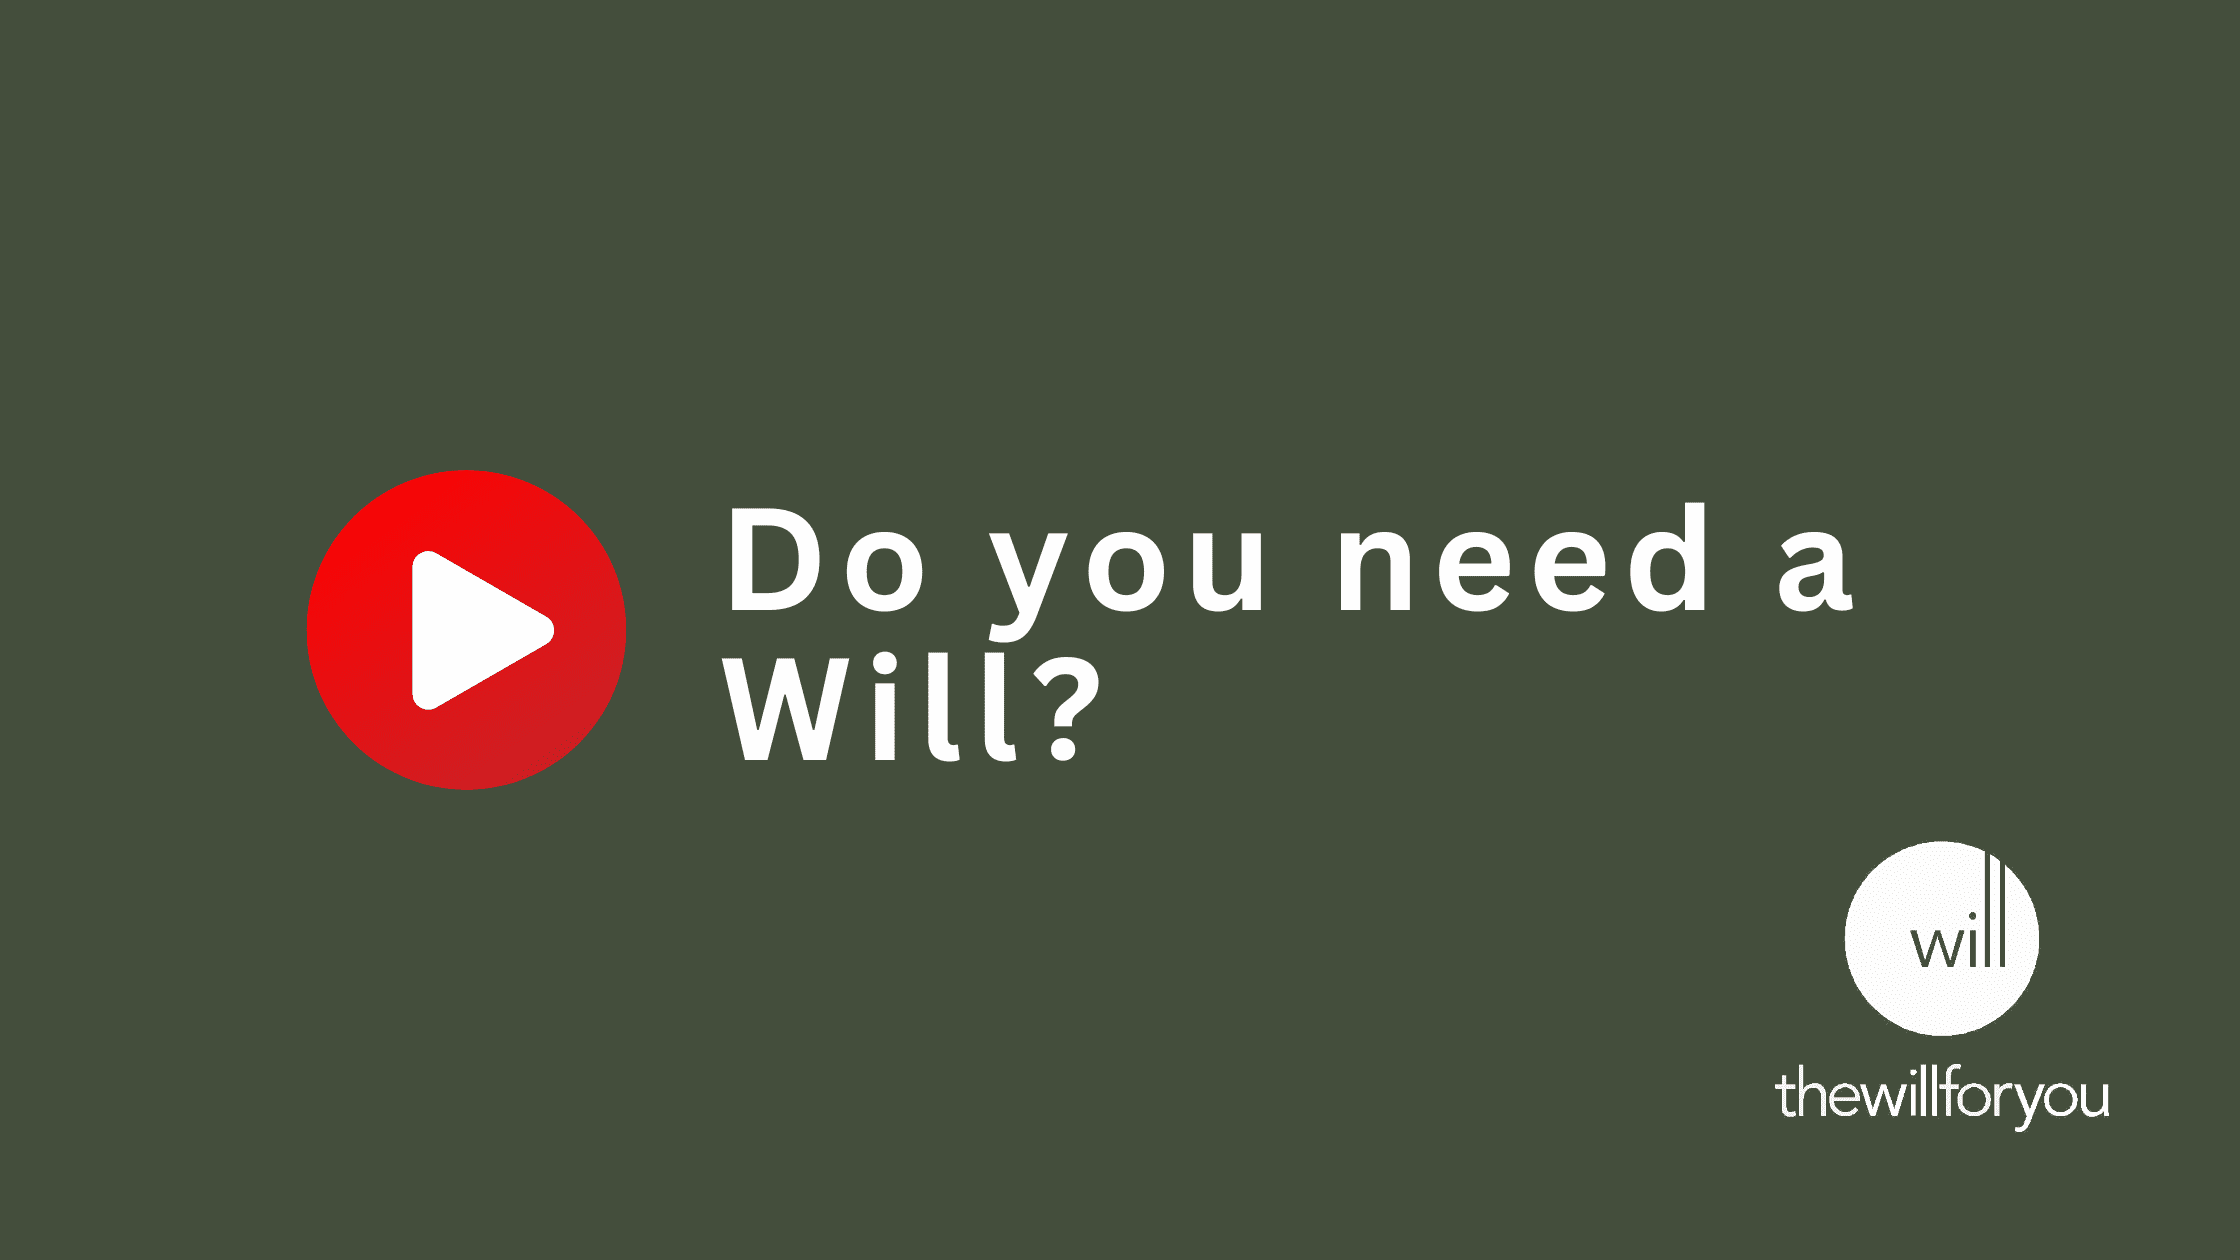 Do you need a Will?